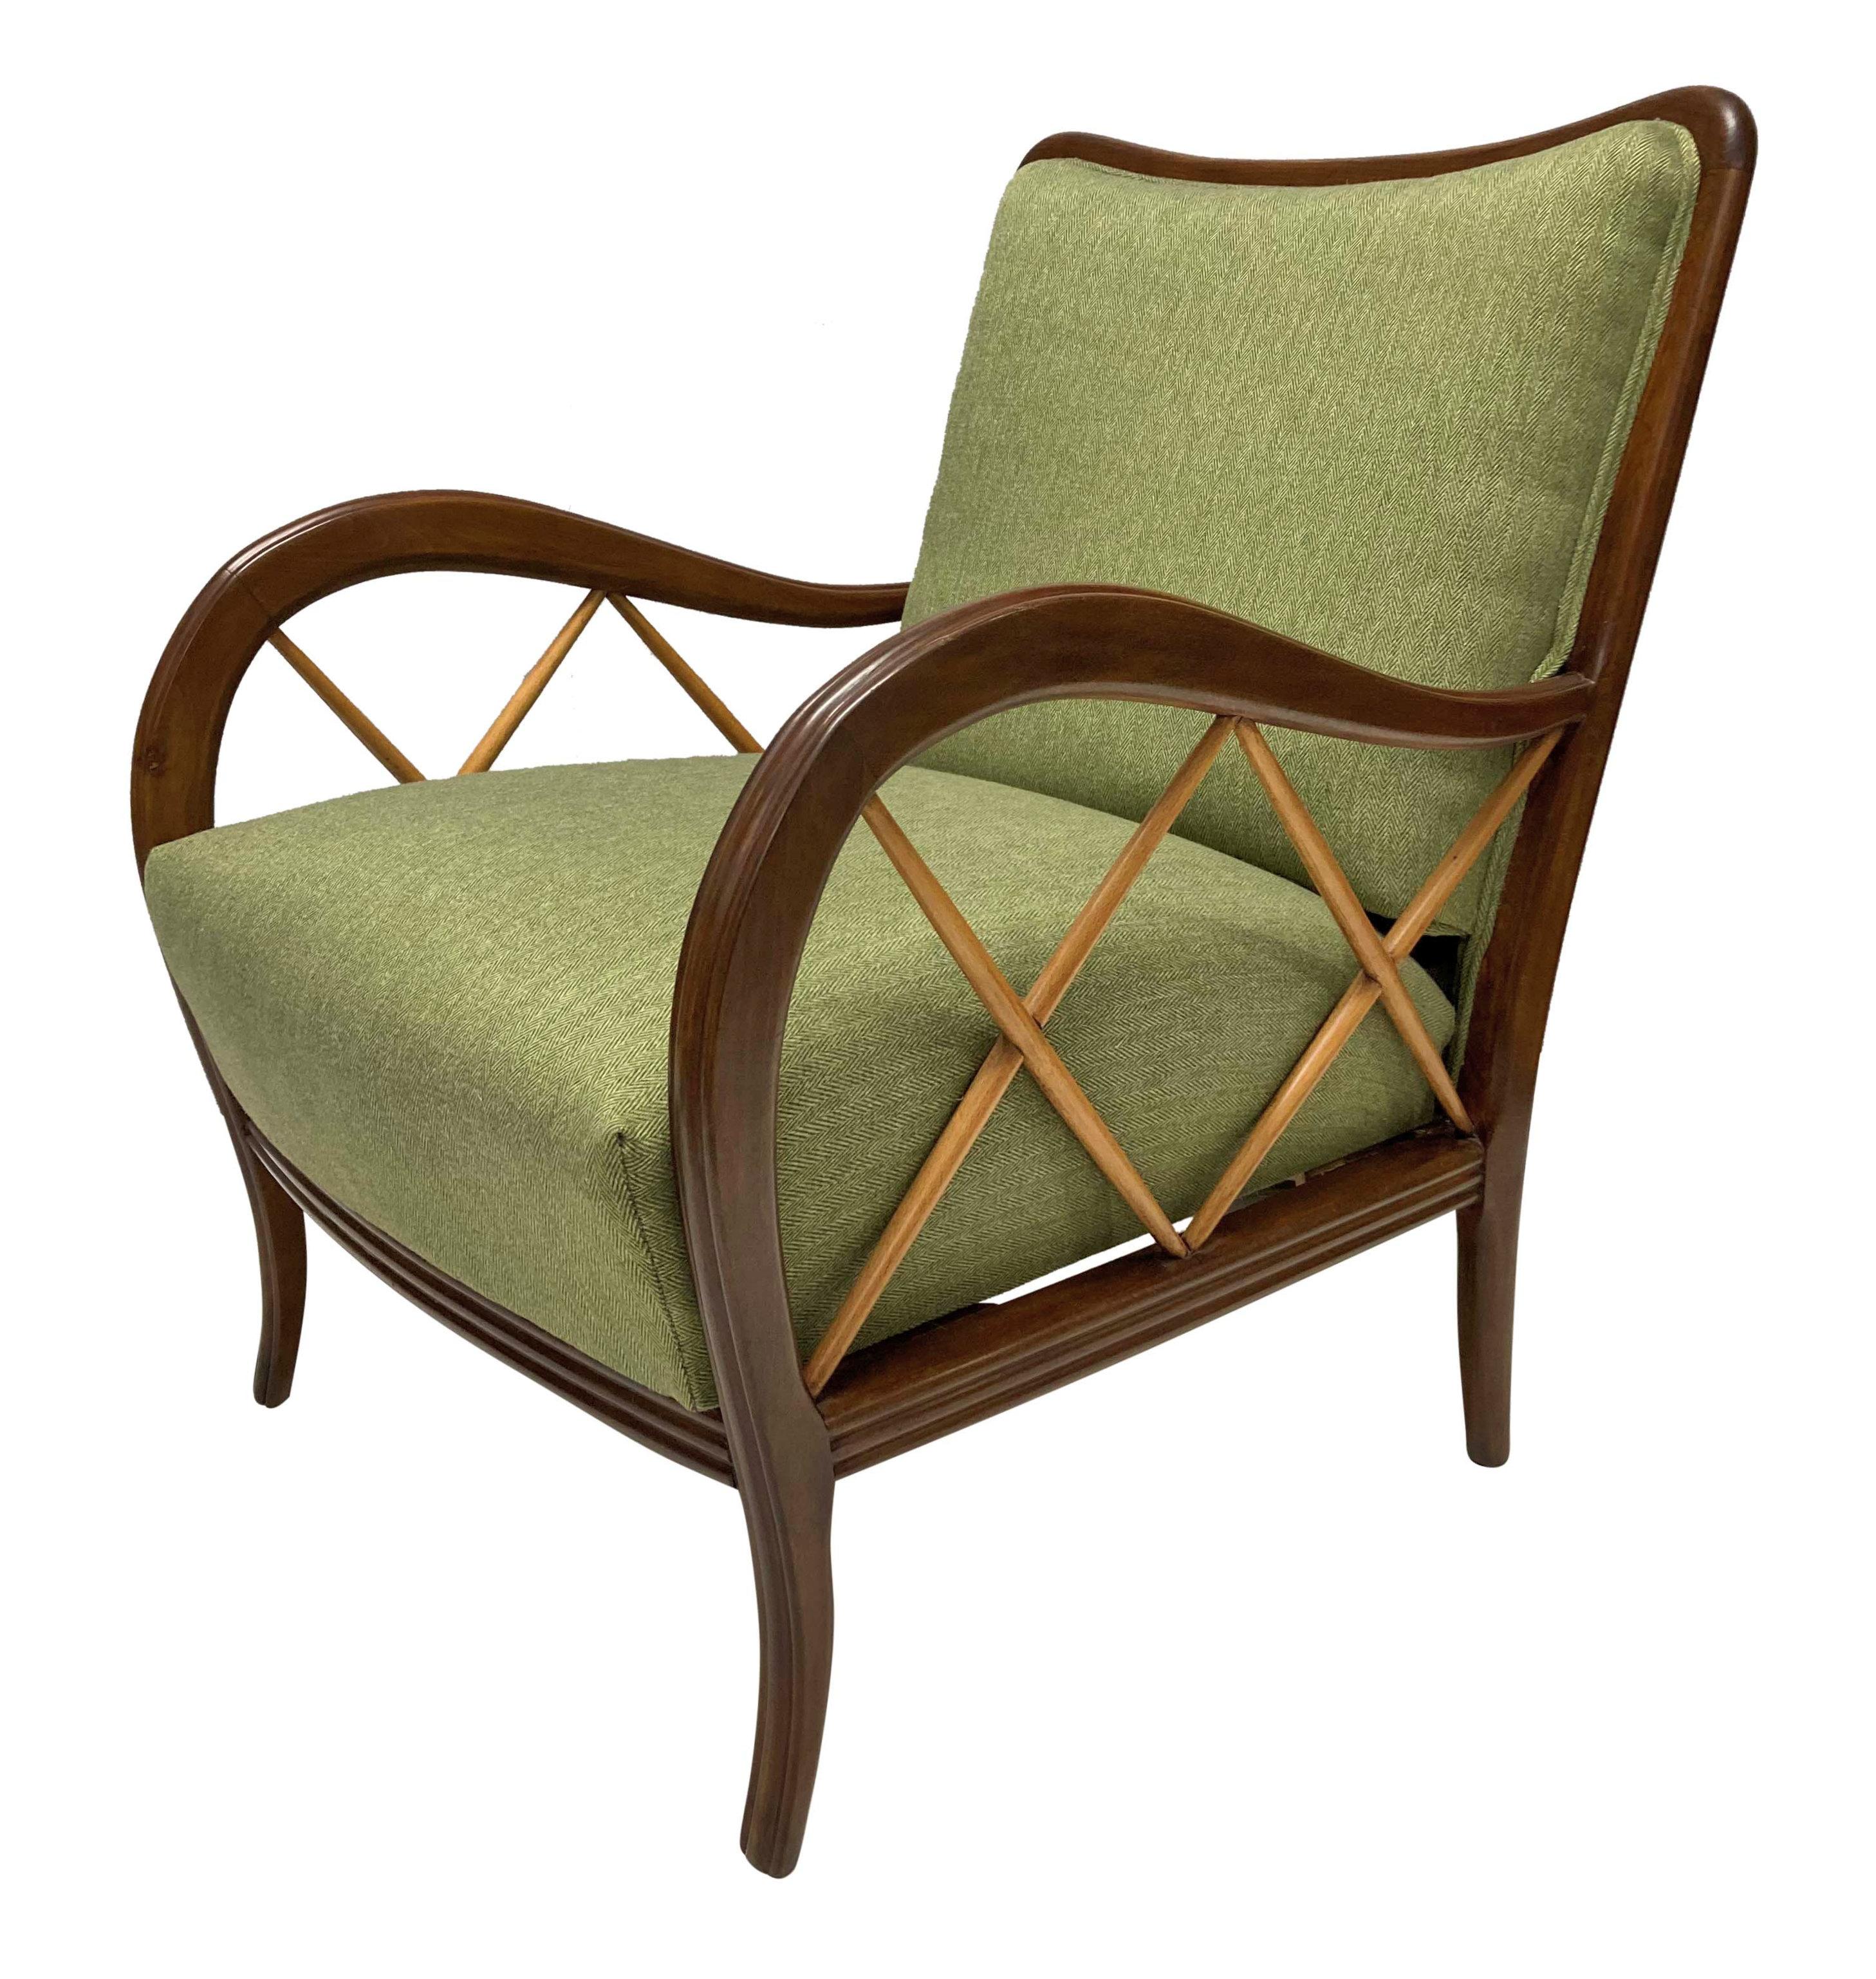 A pair of stylish Italian lounge chairs by Paolo Buffa. In walnut and blond wood and newly upholstered in apple green wool herringbone. En suite witha matching sofa.